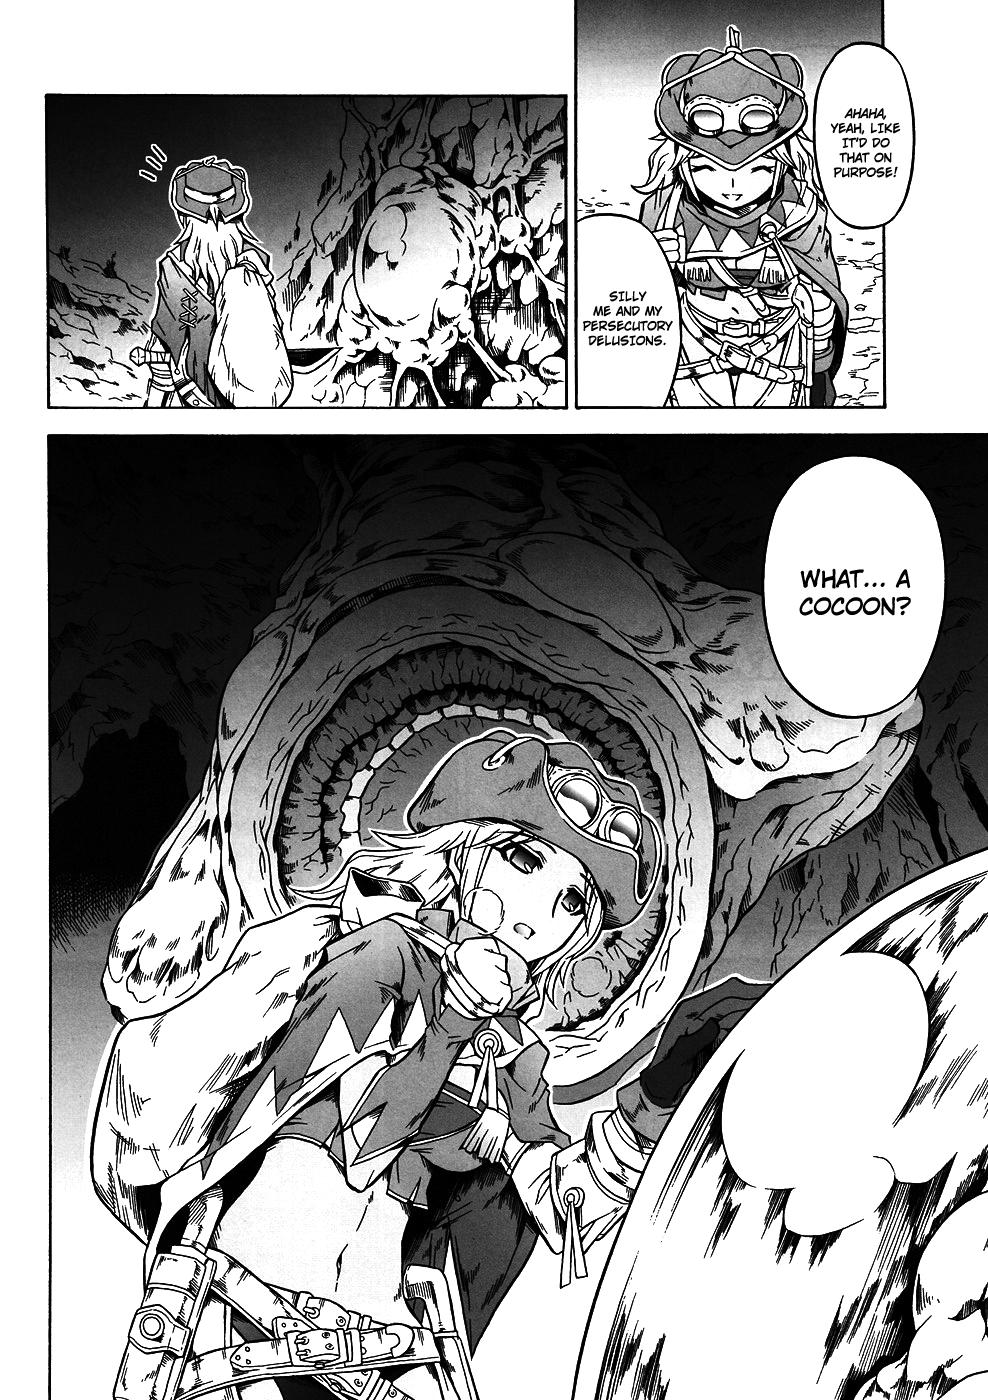 Petite Teen Solo Hunter no Seitai 4: The First Part - Monster hunter Defloration - Page 5